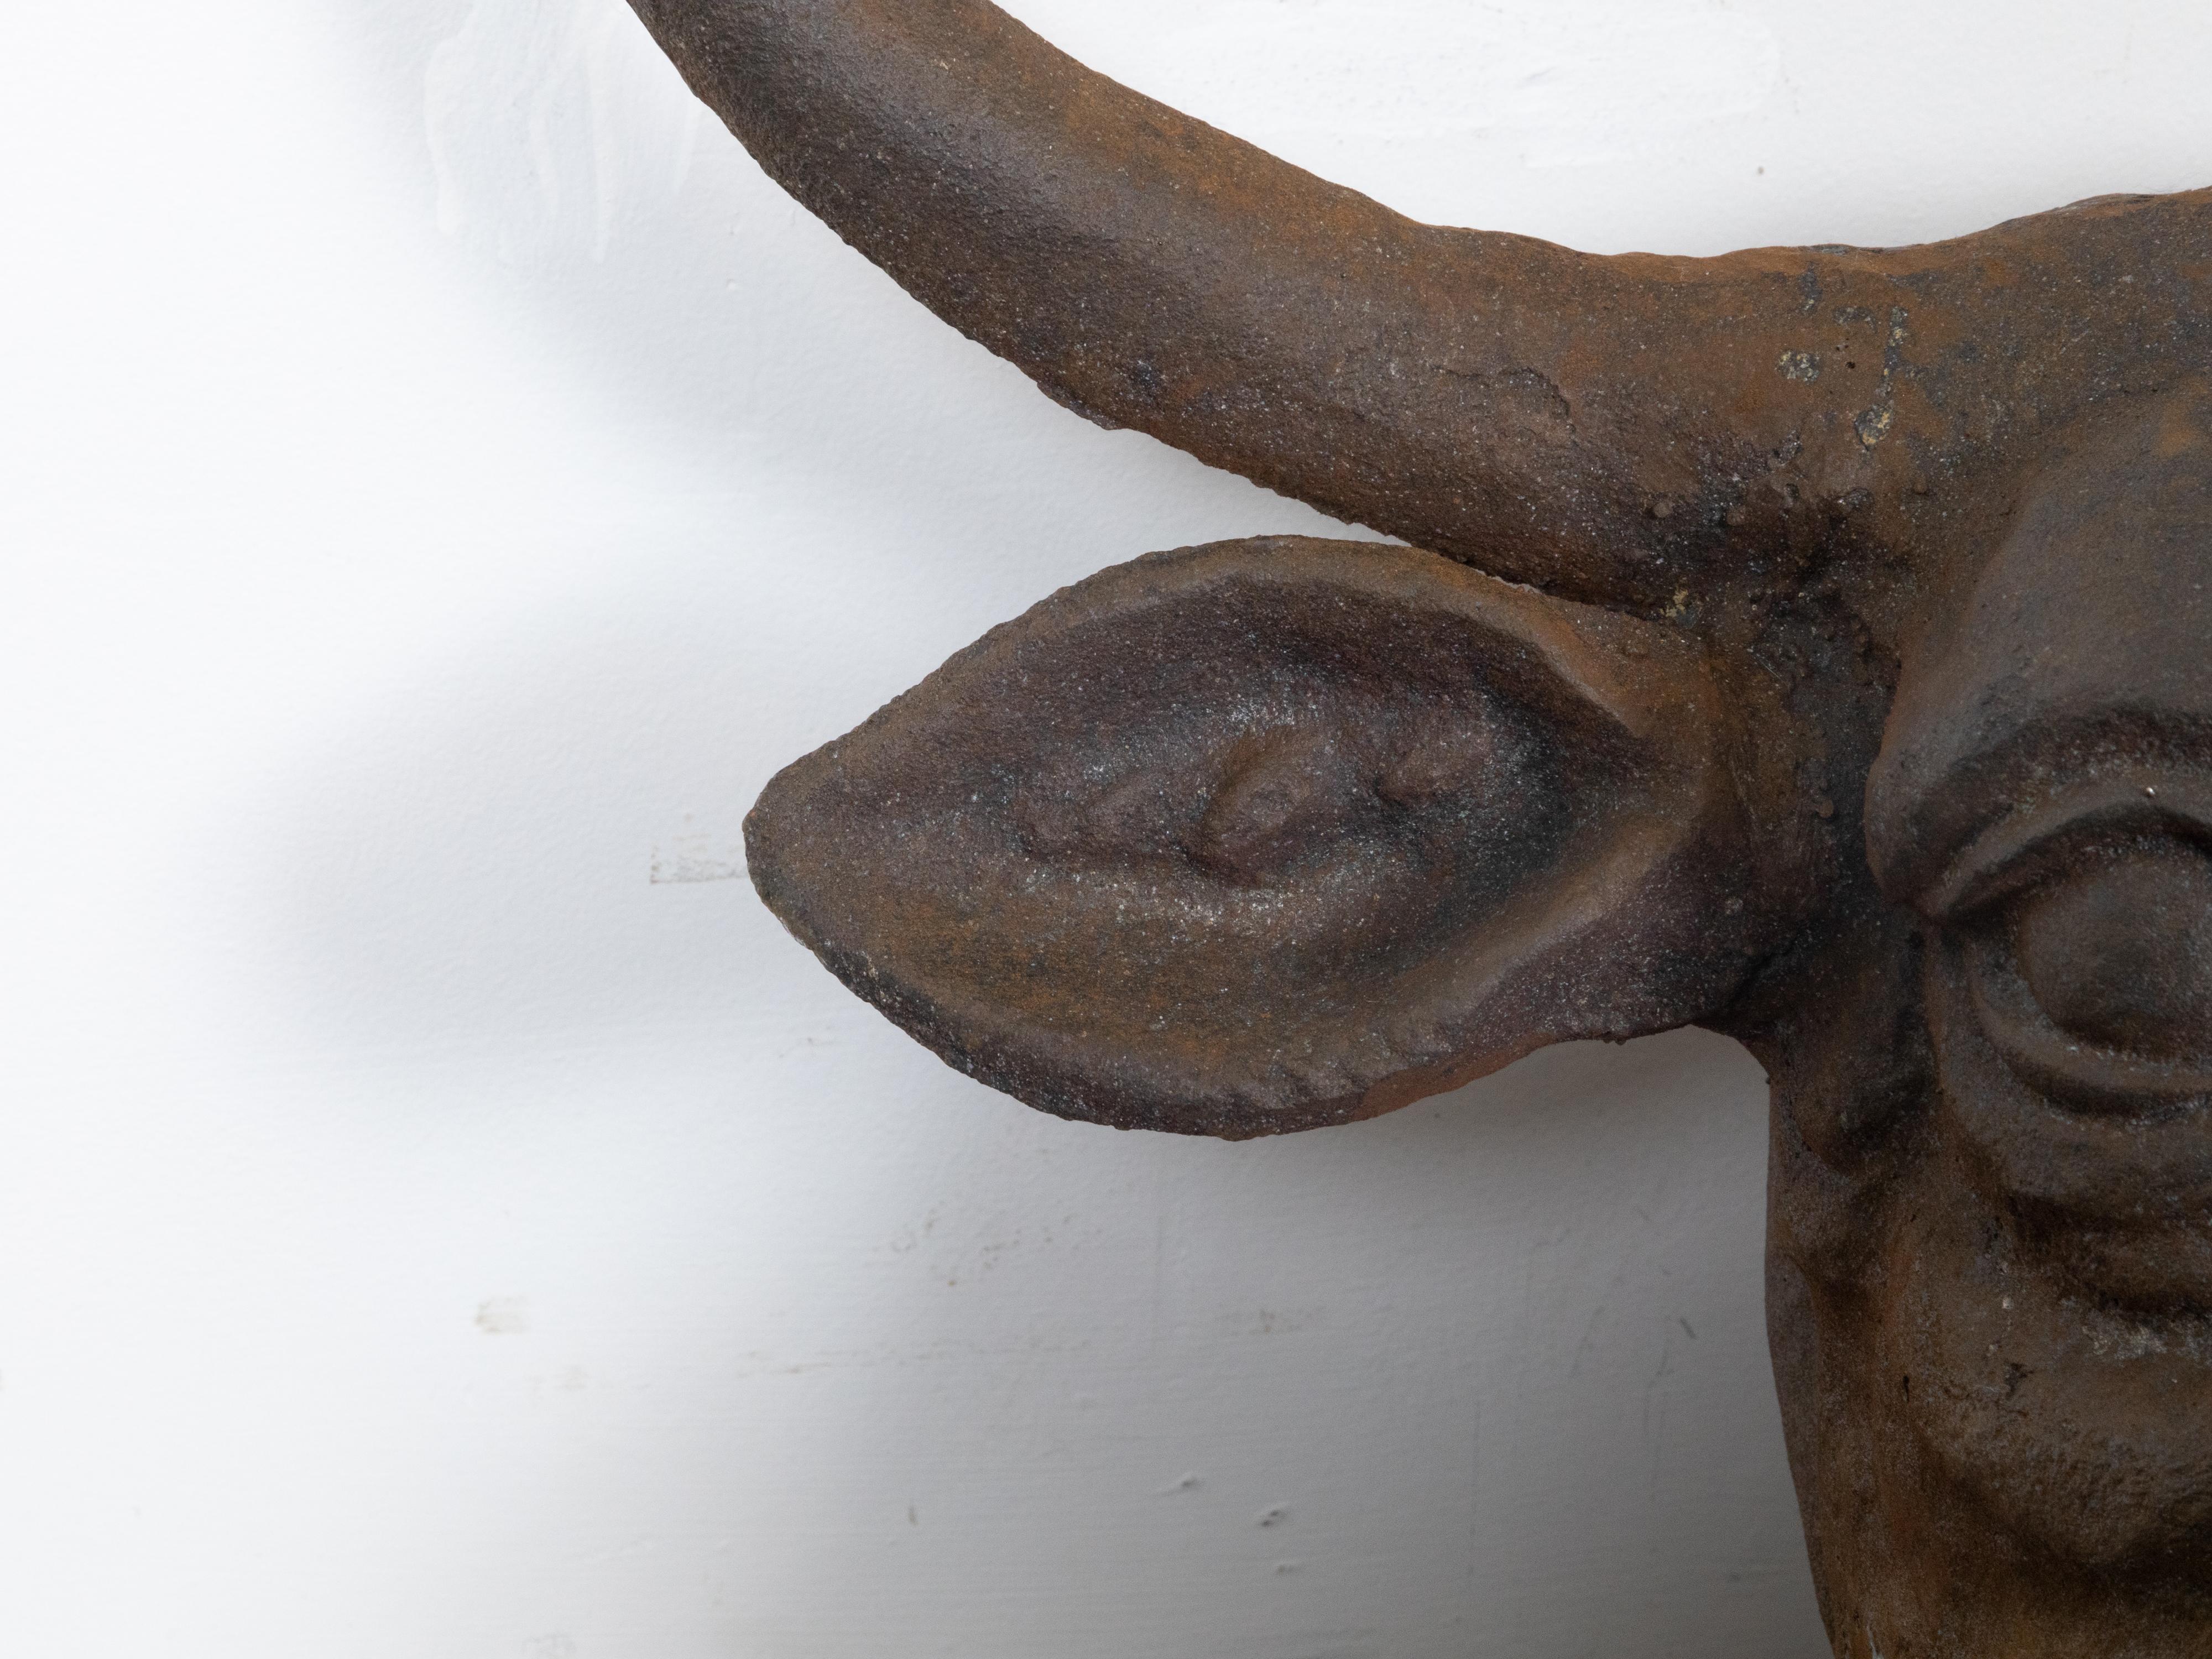 20th Century English 1930s-1940s Cast Iron Bull Wall Hanging Sculpture with Rusty Patina For Sale